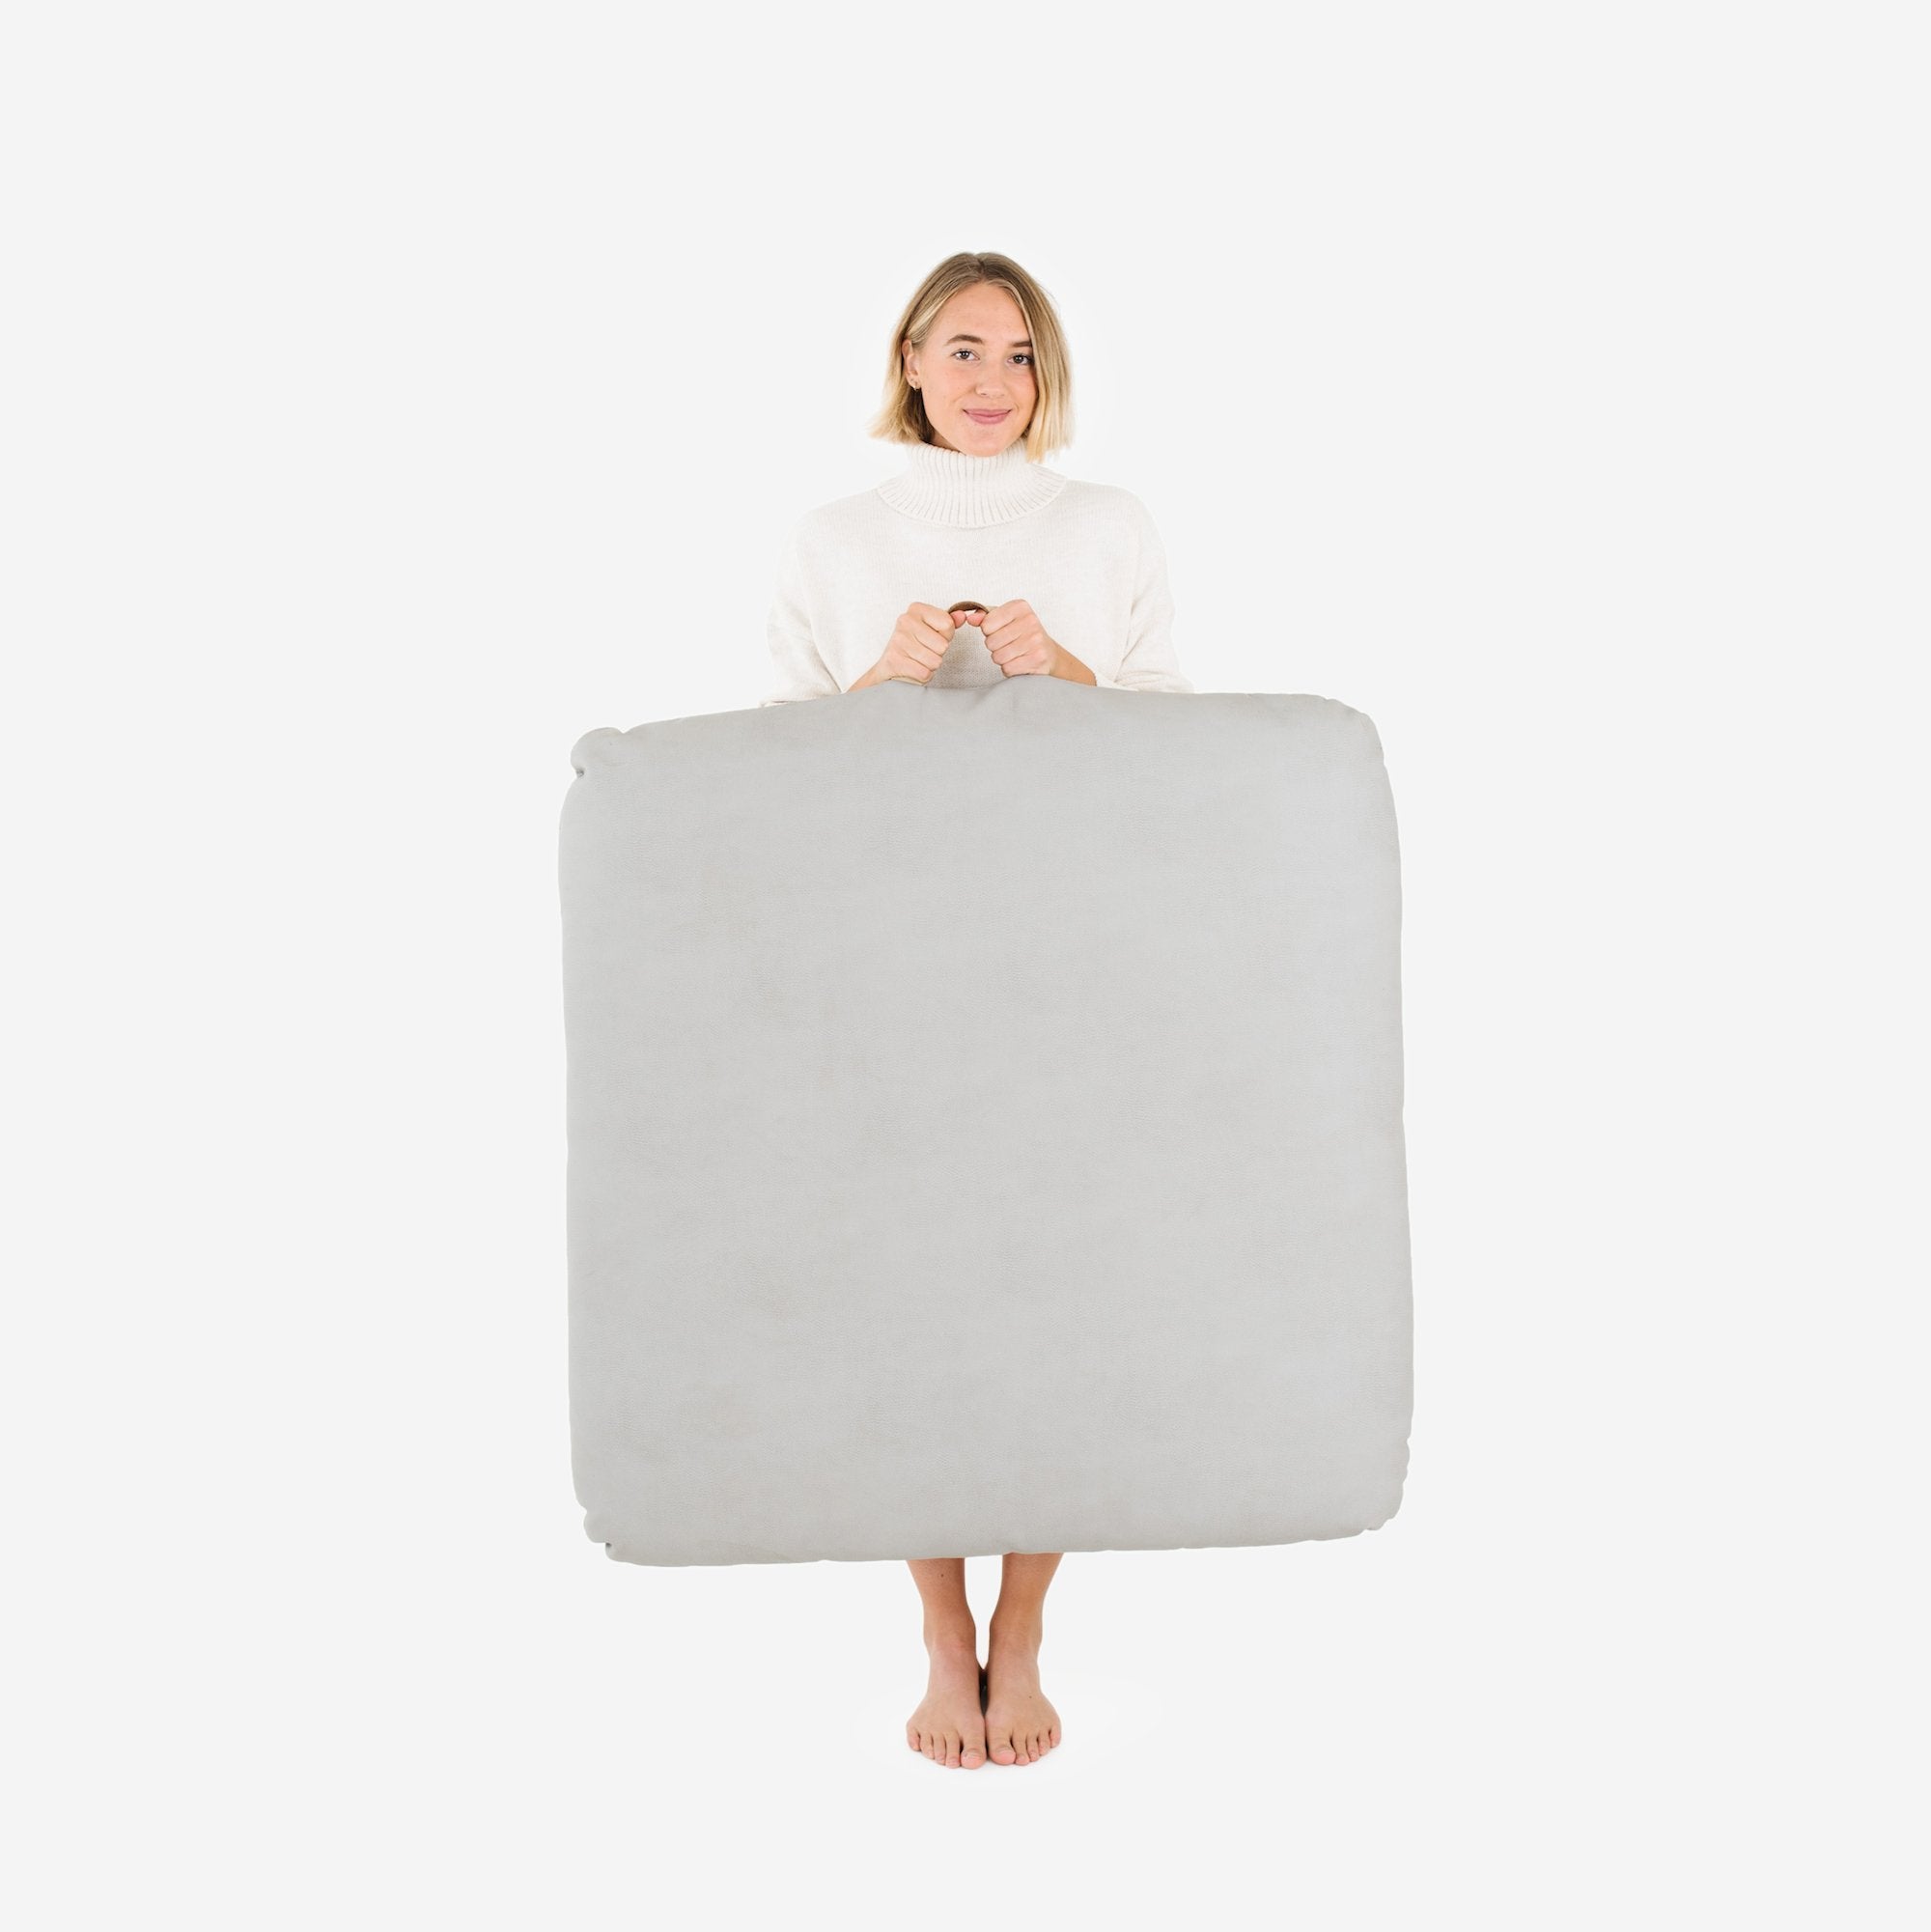 Pewter (on sale) / Square@Woman holding the Pewter Square Floor Cushion